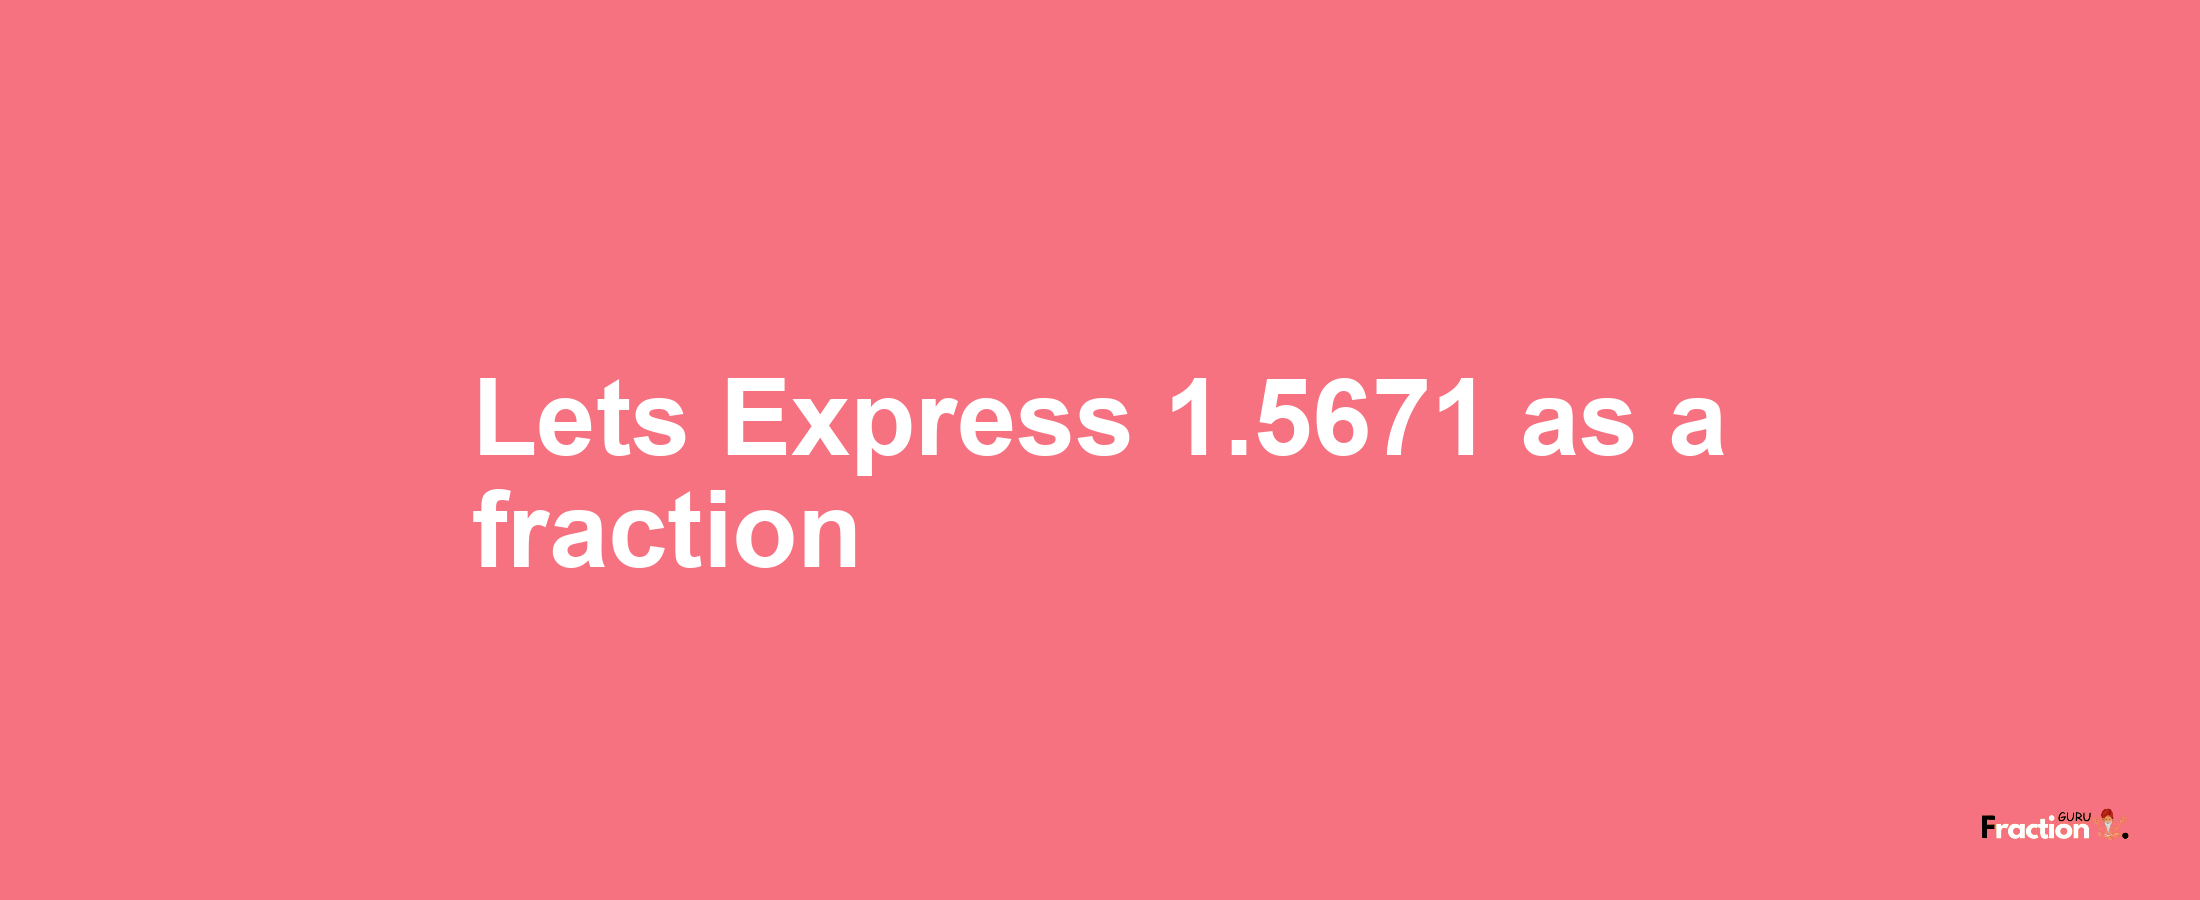 Lets Express 1.5671 as afraction